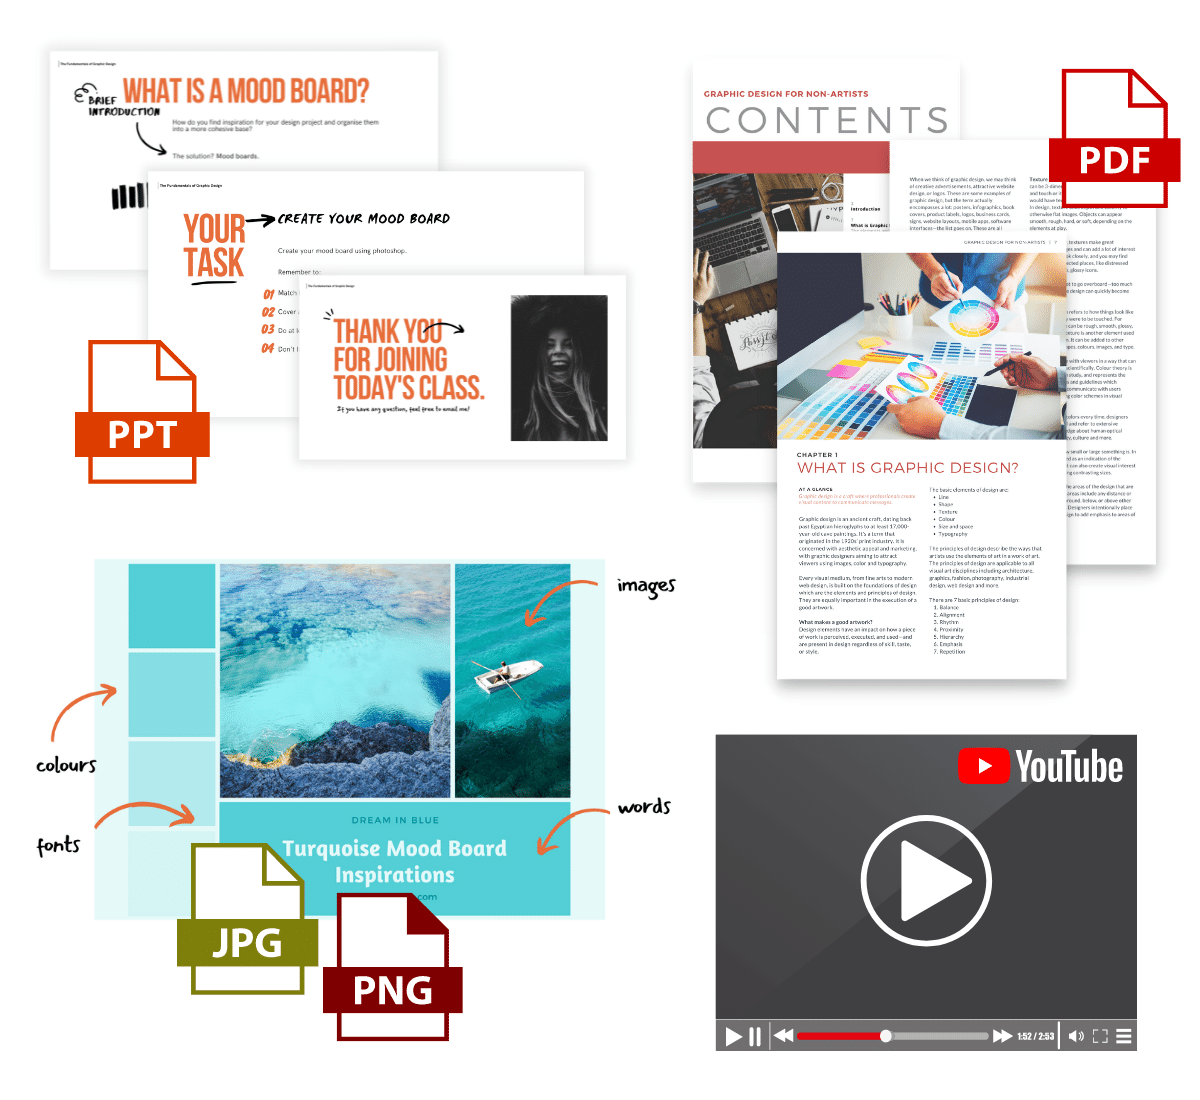 Our existing resources include a PPT, PDF, JPG/PNG and a YouTube video, as pictured above. We will edit and use these to build our online course.